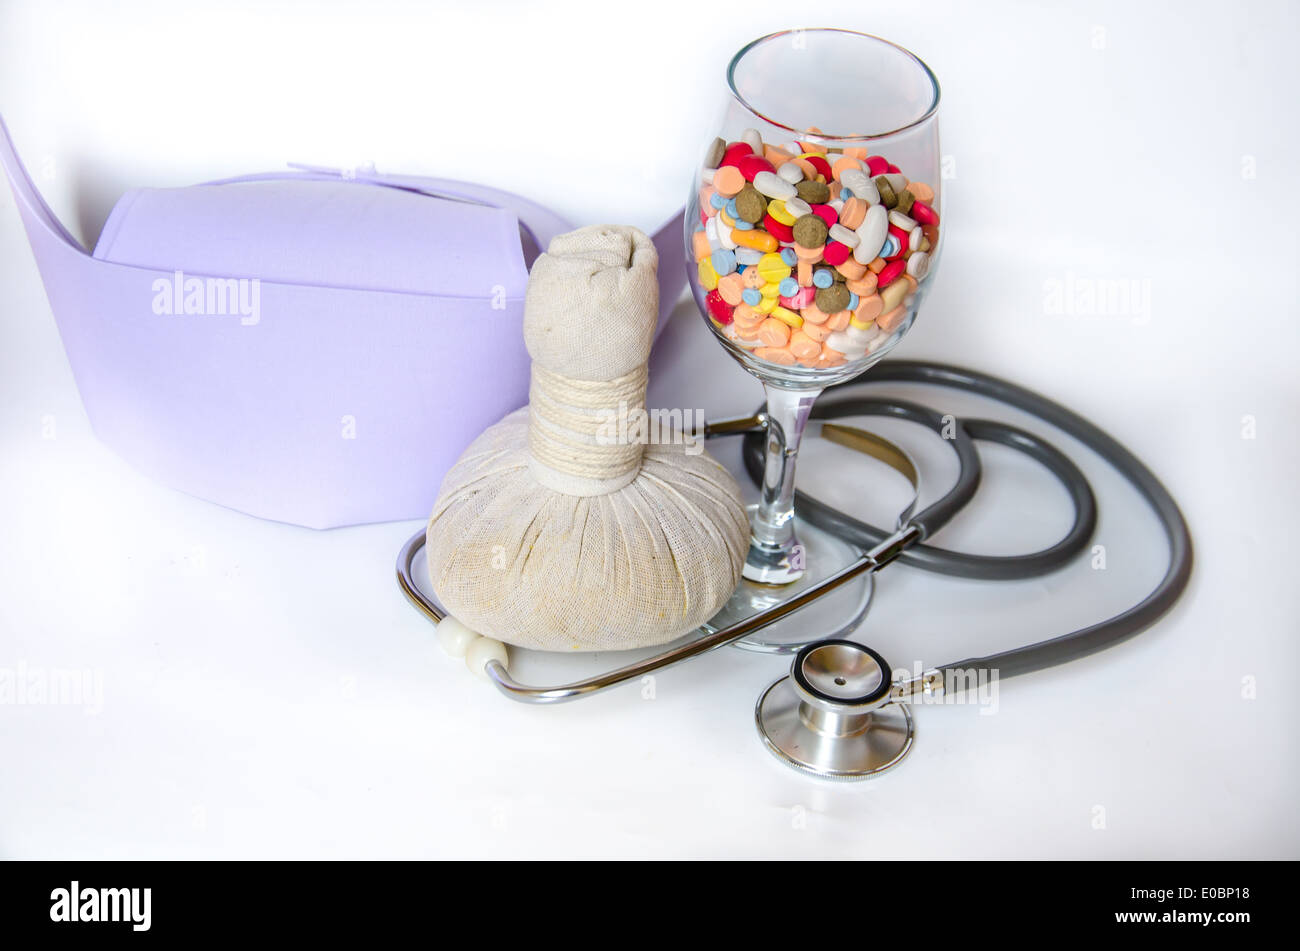 compress ball herbal with medicine and stethoscope Stock Photo